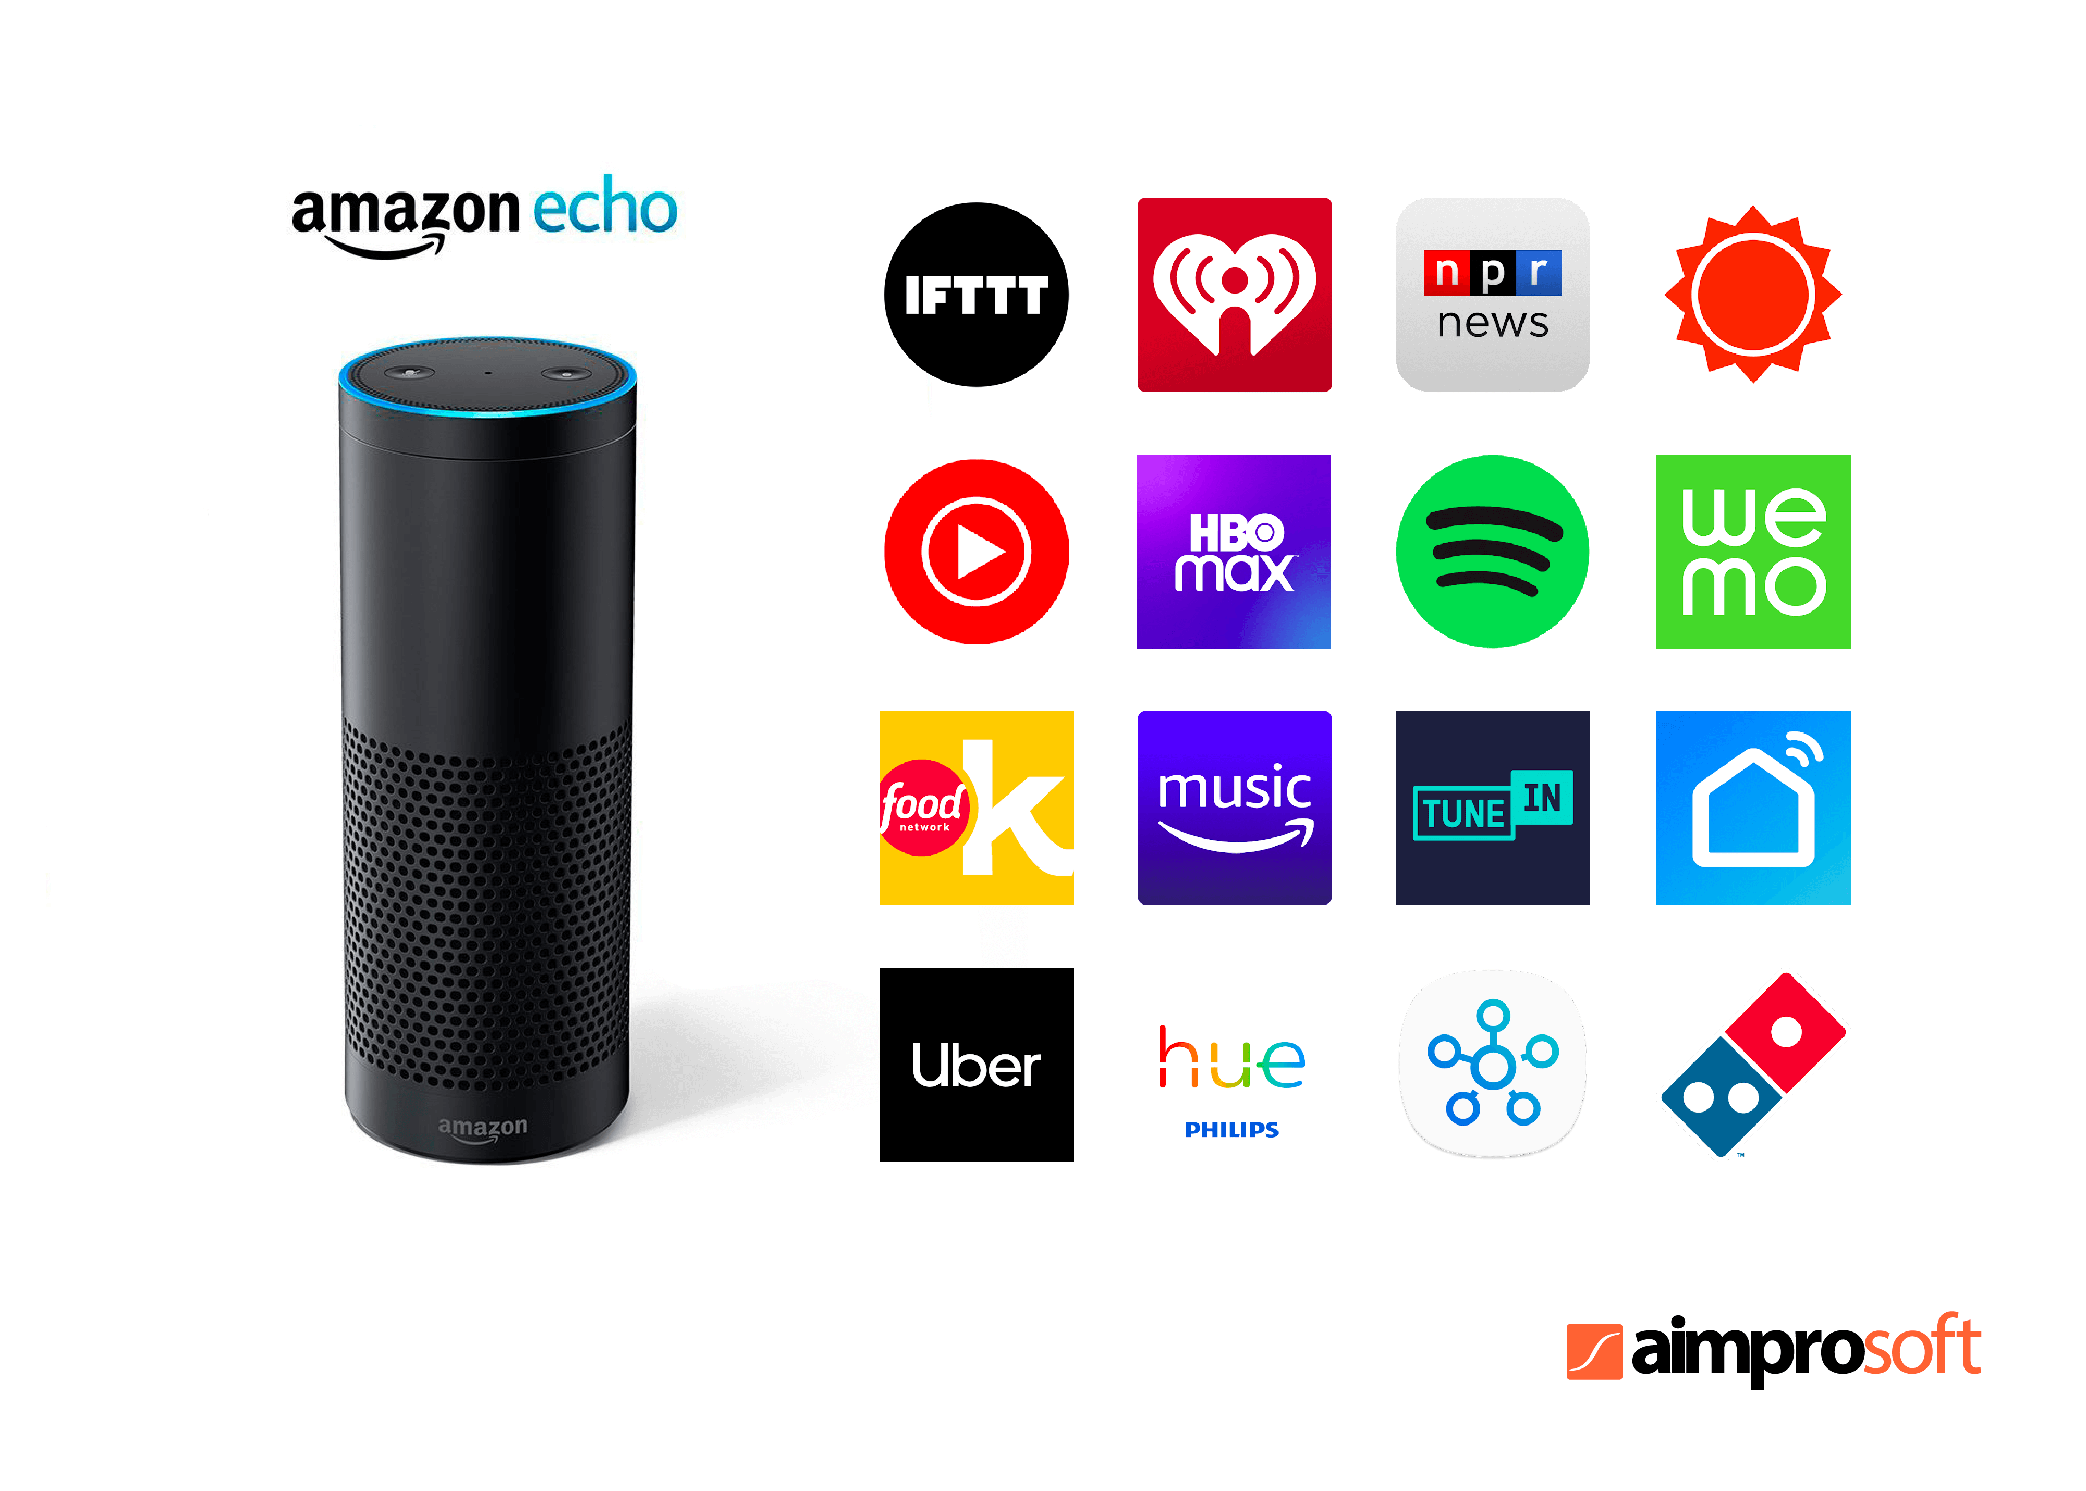 Amazon Echo smart speaker and its featured partners